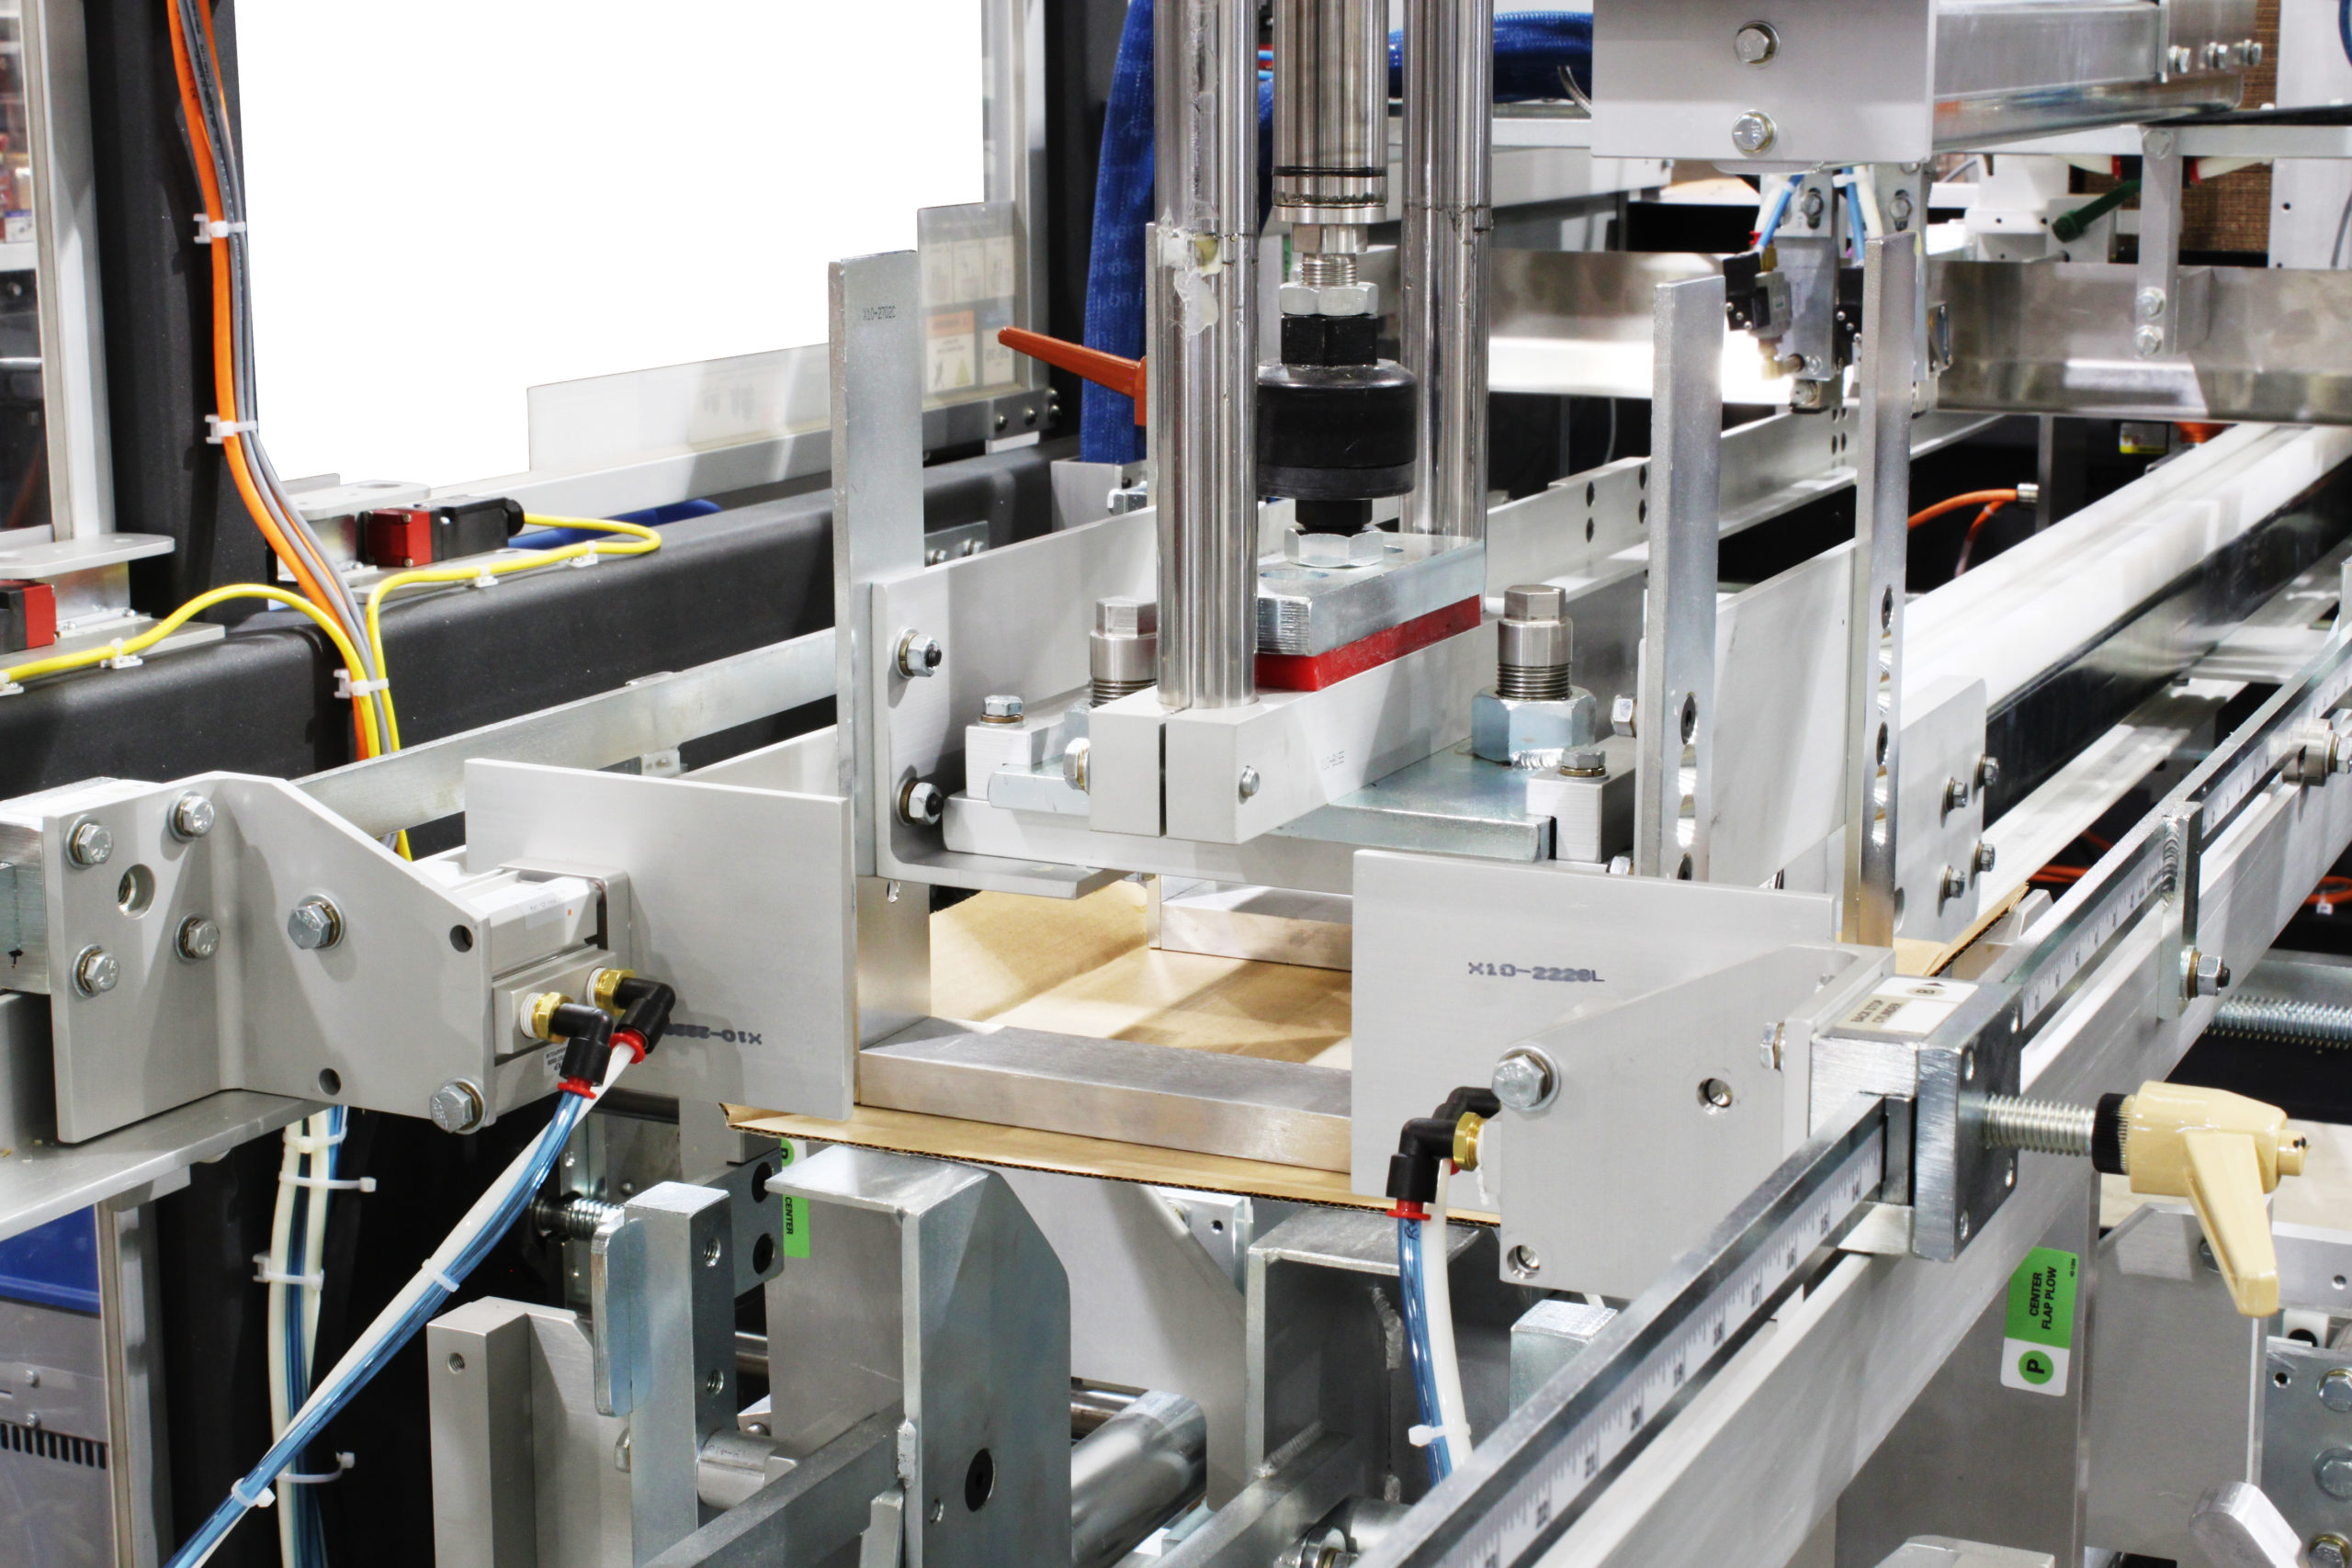 Using Servos Improves Control and Boosts ROI in Packaging Applications